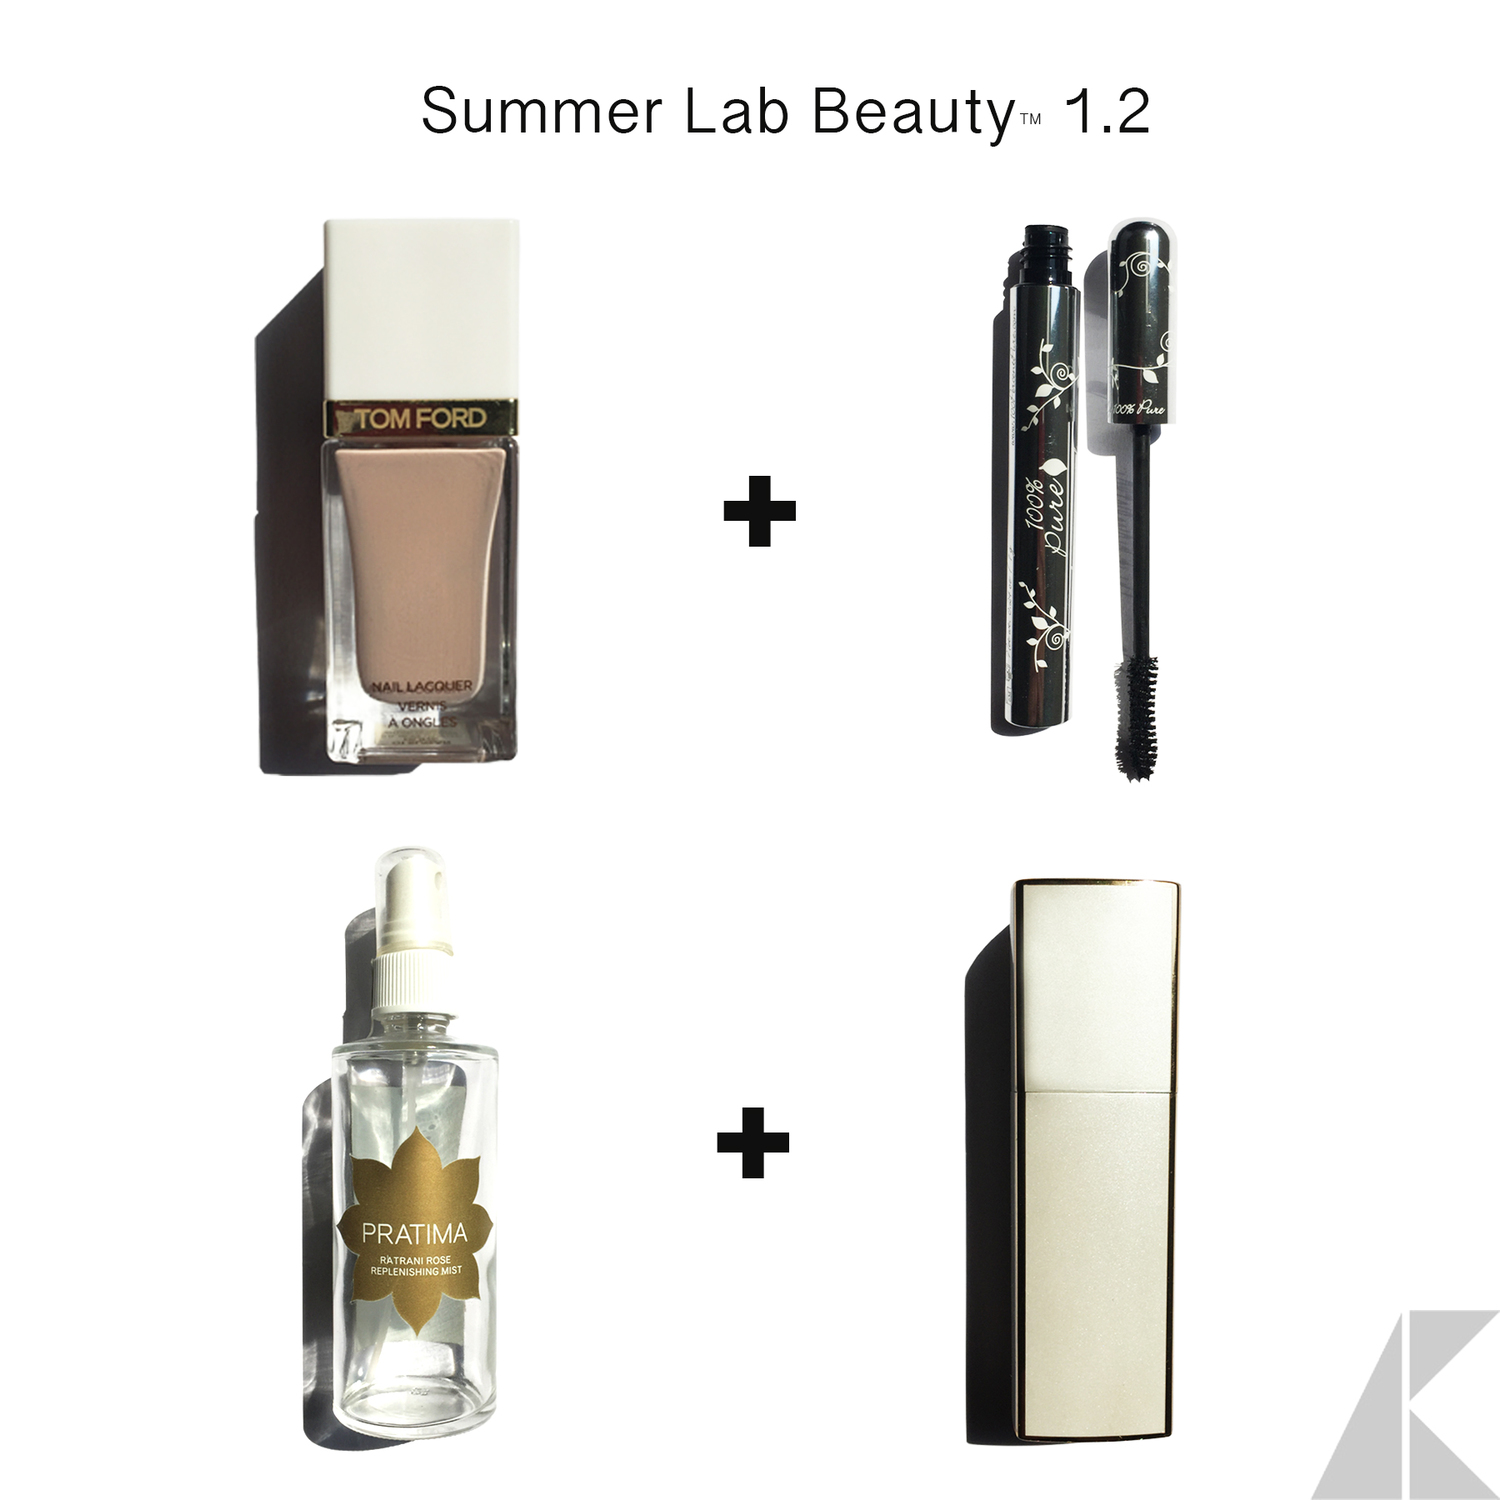   Figure 2- Summer Lab Beauty 1.2= Items clockwise from top left: Tom Ford Nail Lacquer in Sugar Dune ($36), 100% Pure Cosmetics Fruit Pigmented Ultra Lengthening Mascara in Black Tea ($25), Chanel Coco Mademoiselle Eau de Parfum purse twist and spra